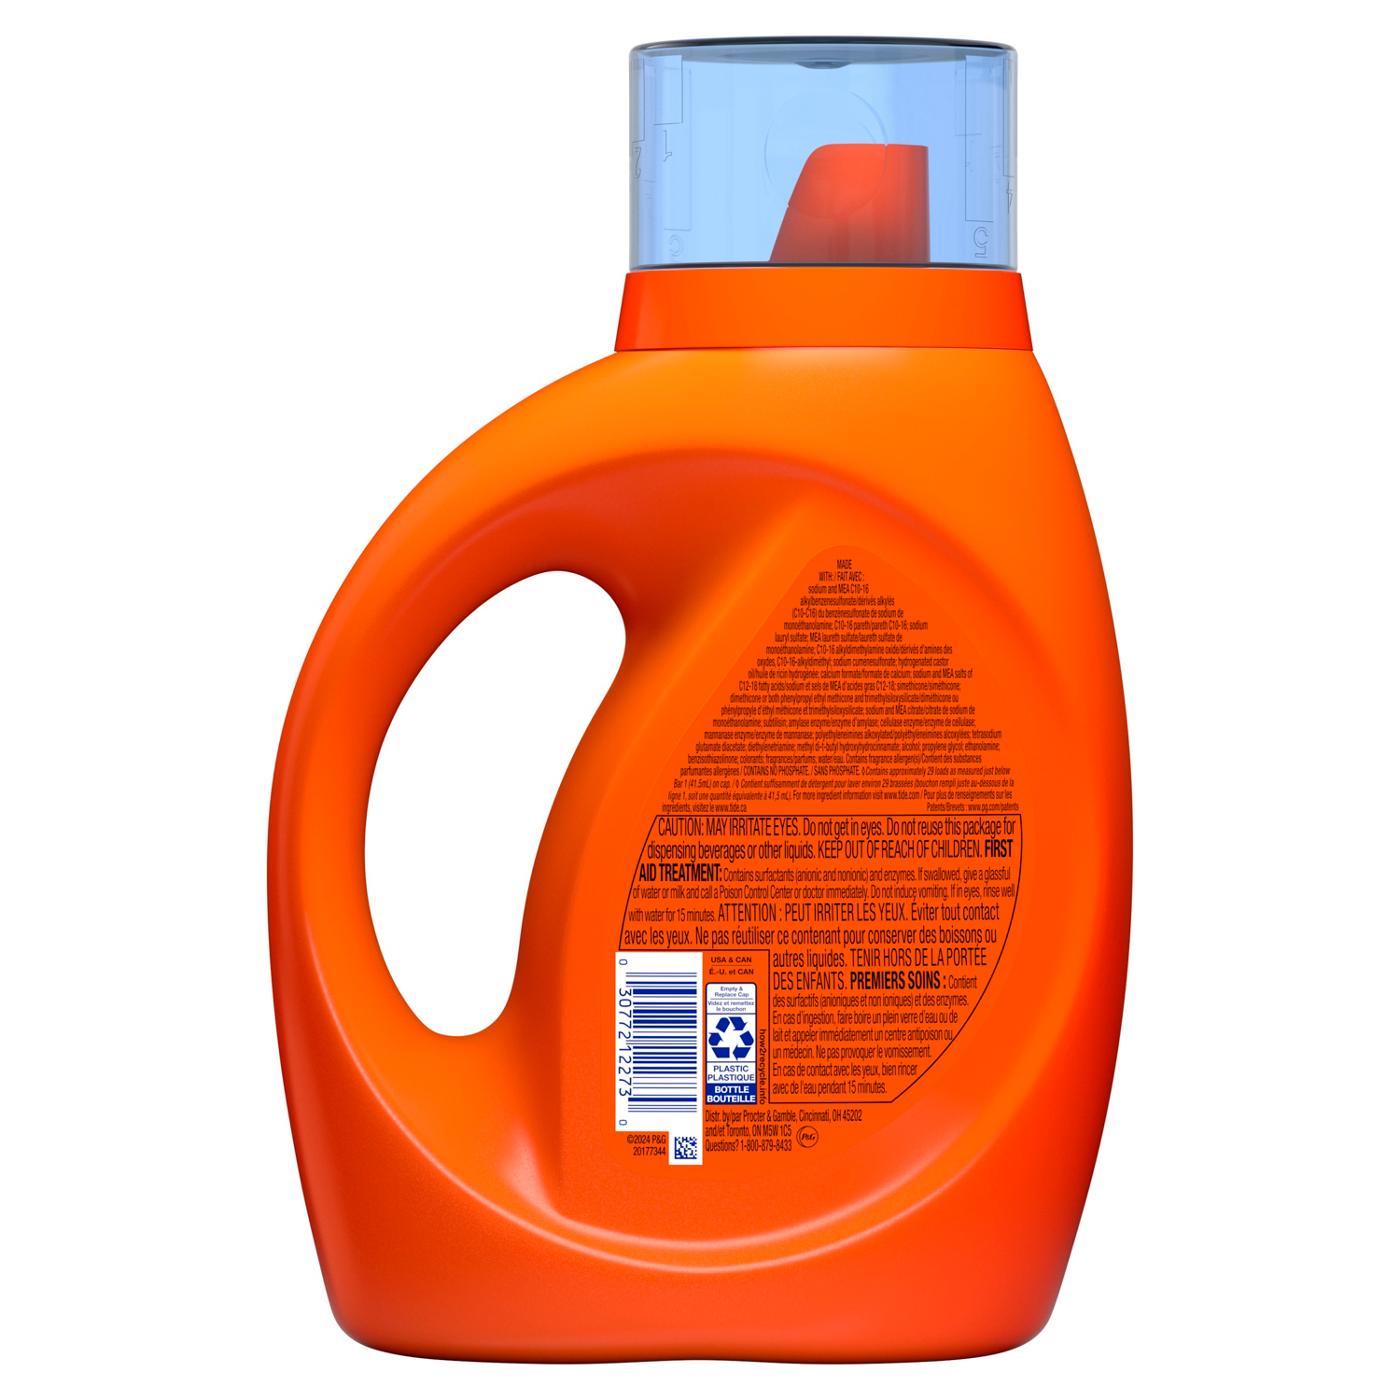 Tide + Downy HE Turbo Clean Liquid Laundry Detergent, 29 Loads - April Fresh; image 4 of 12